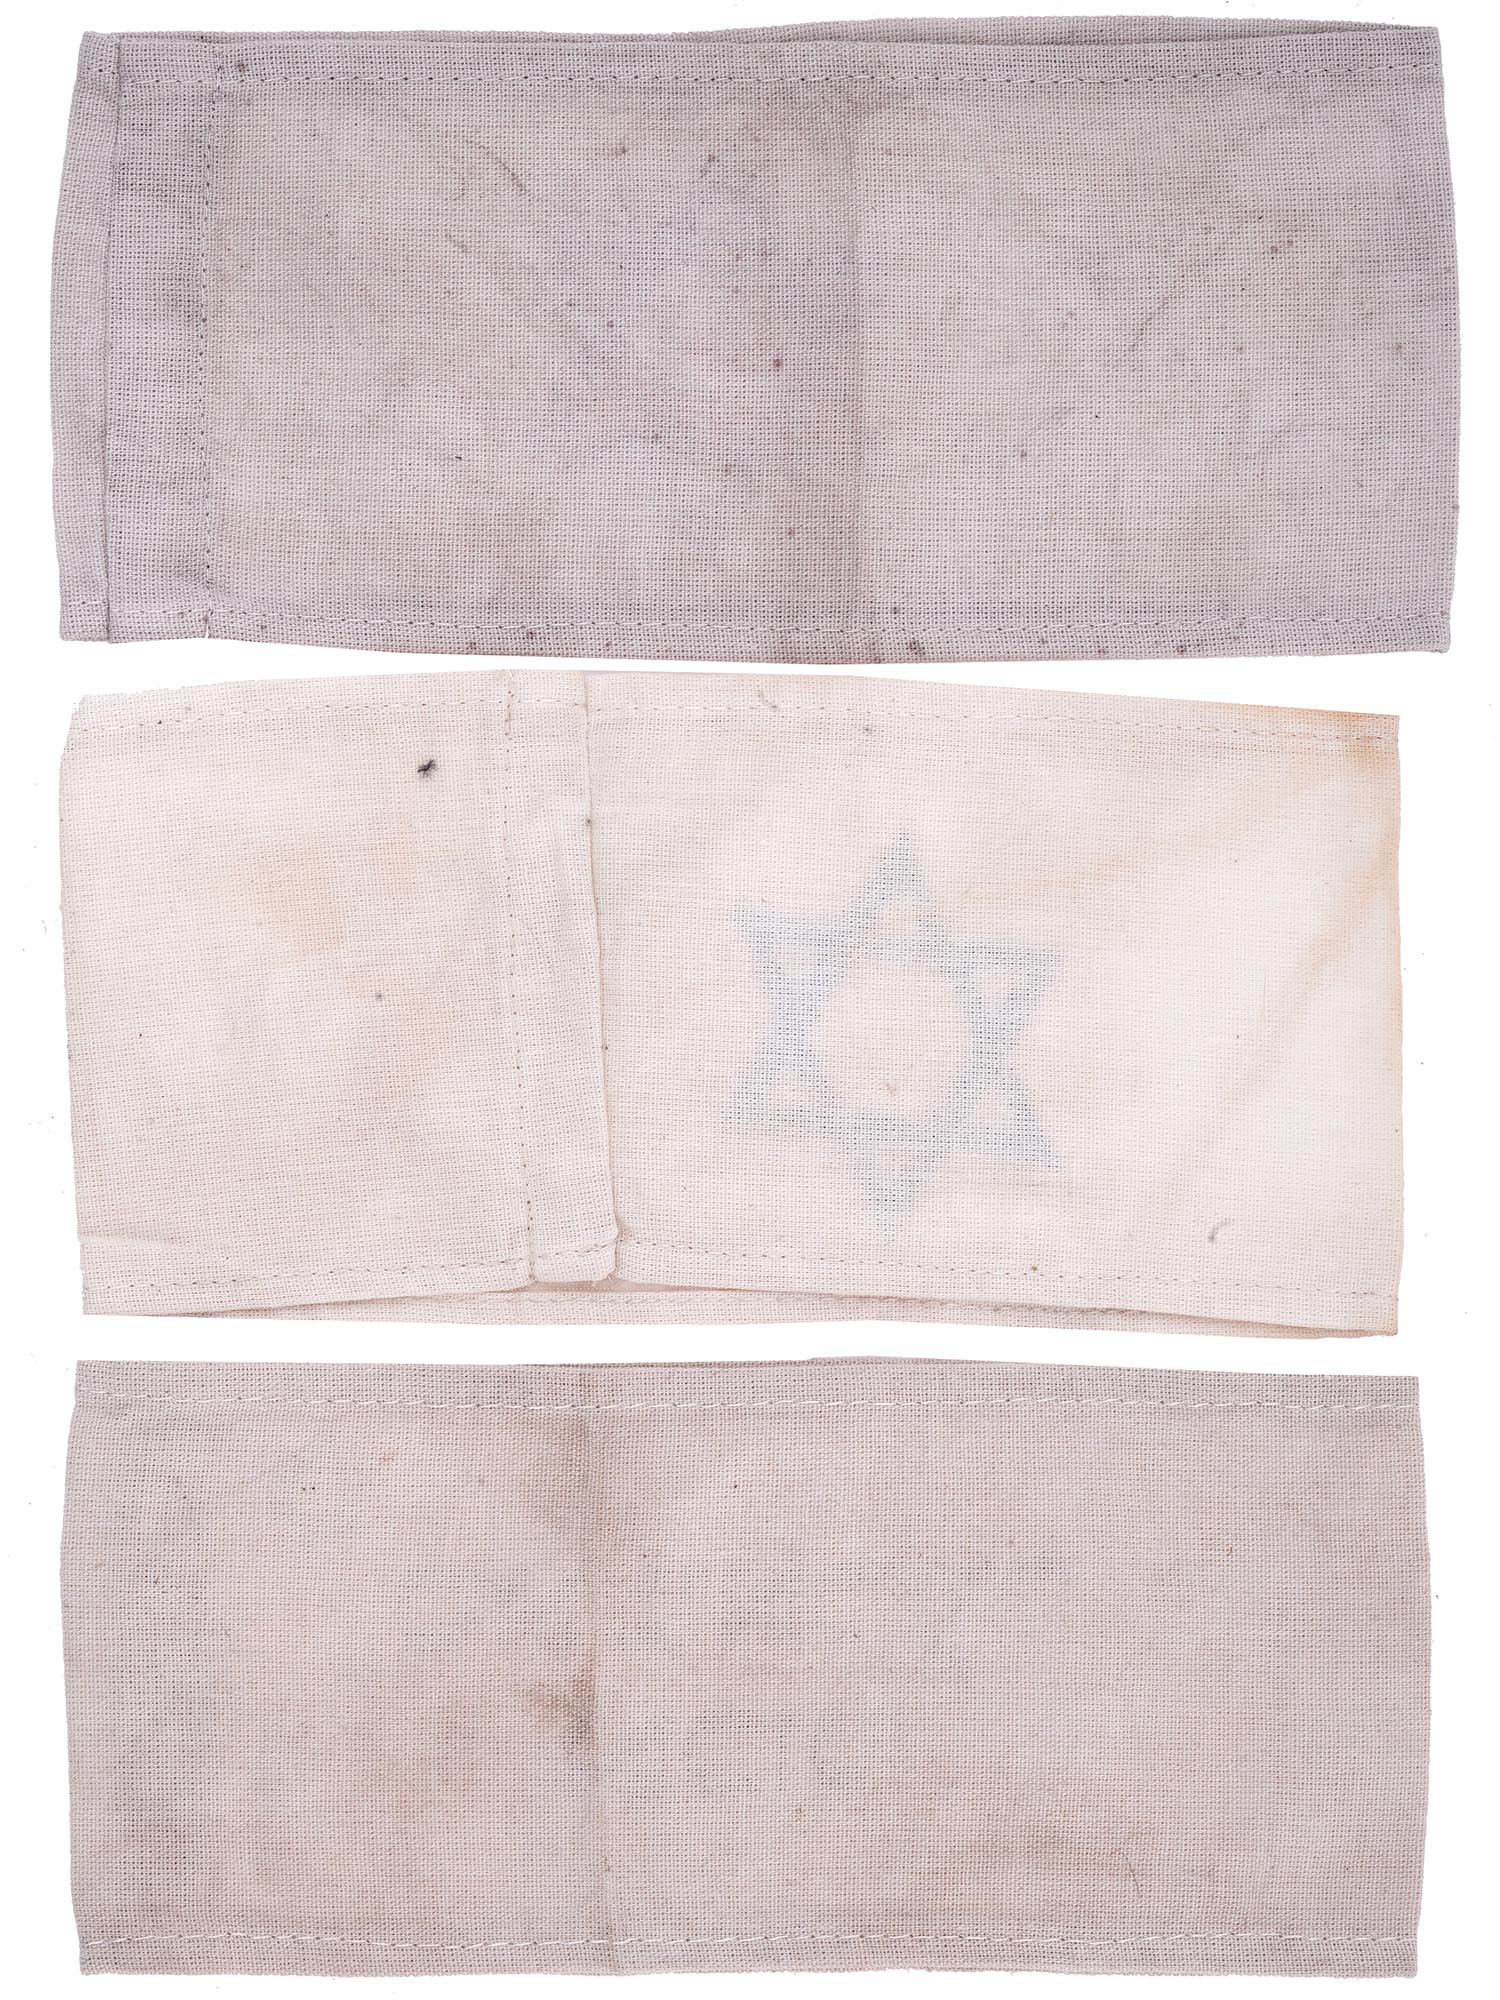 WWII JEWISH GHETTO AND CONCENTRATION CAMP ARMBANDS PIC-1